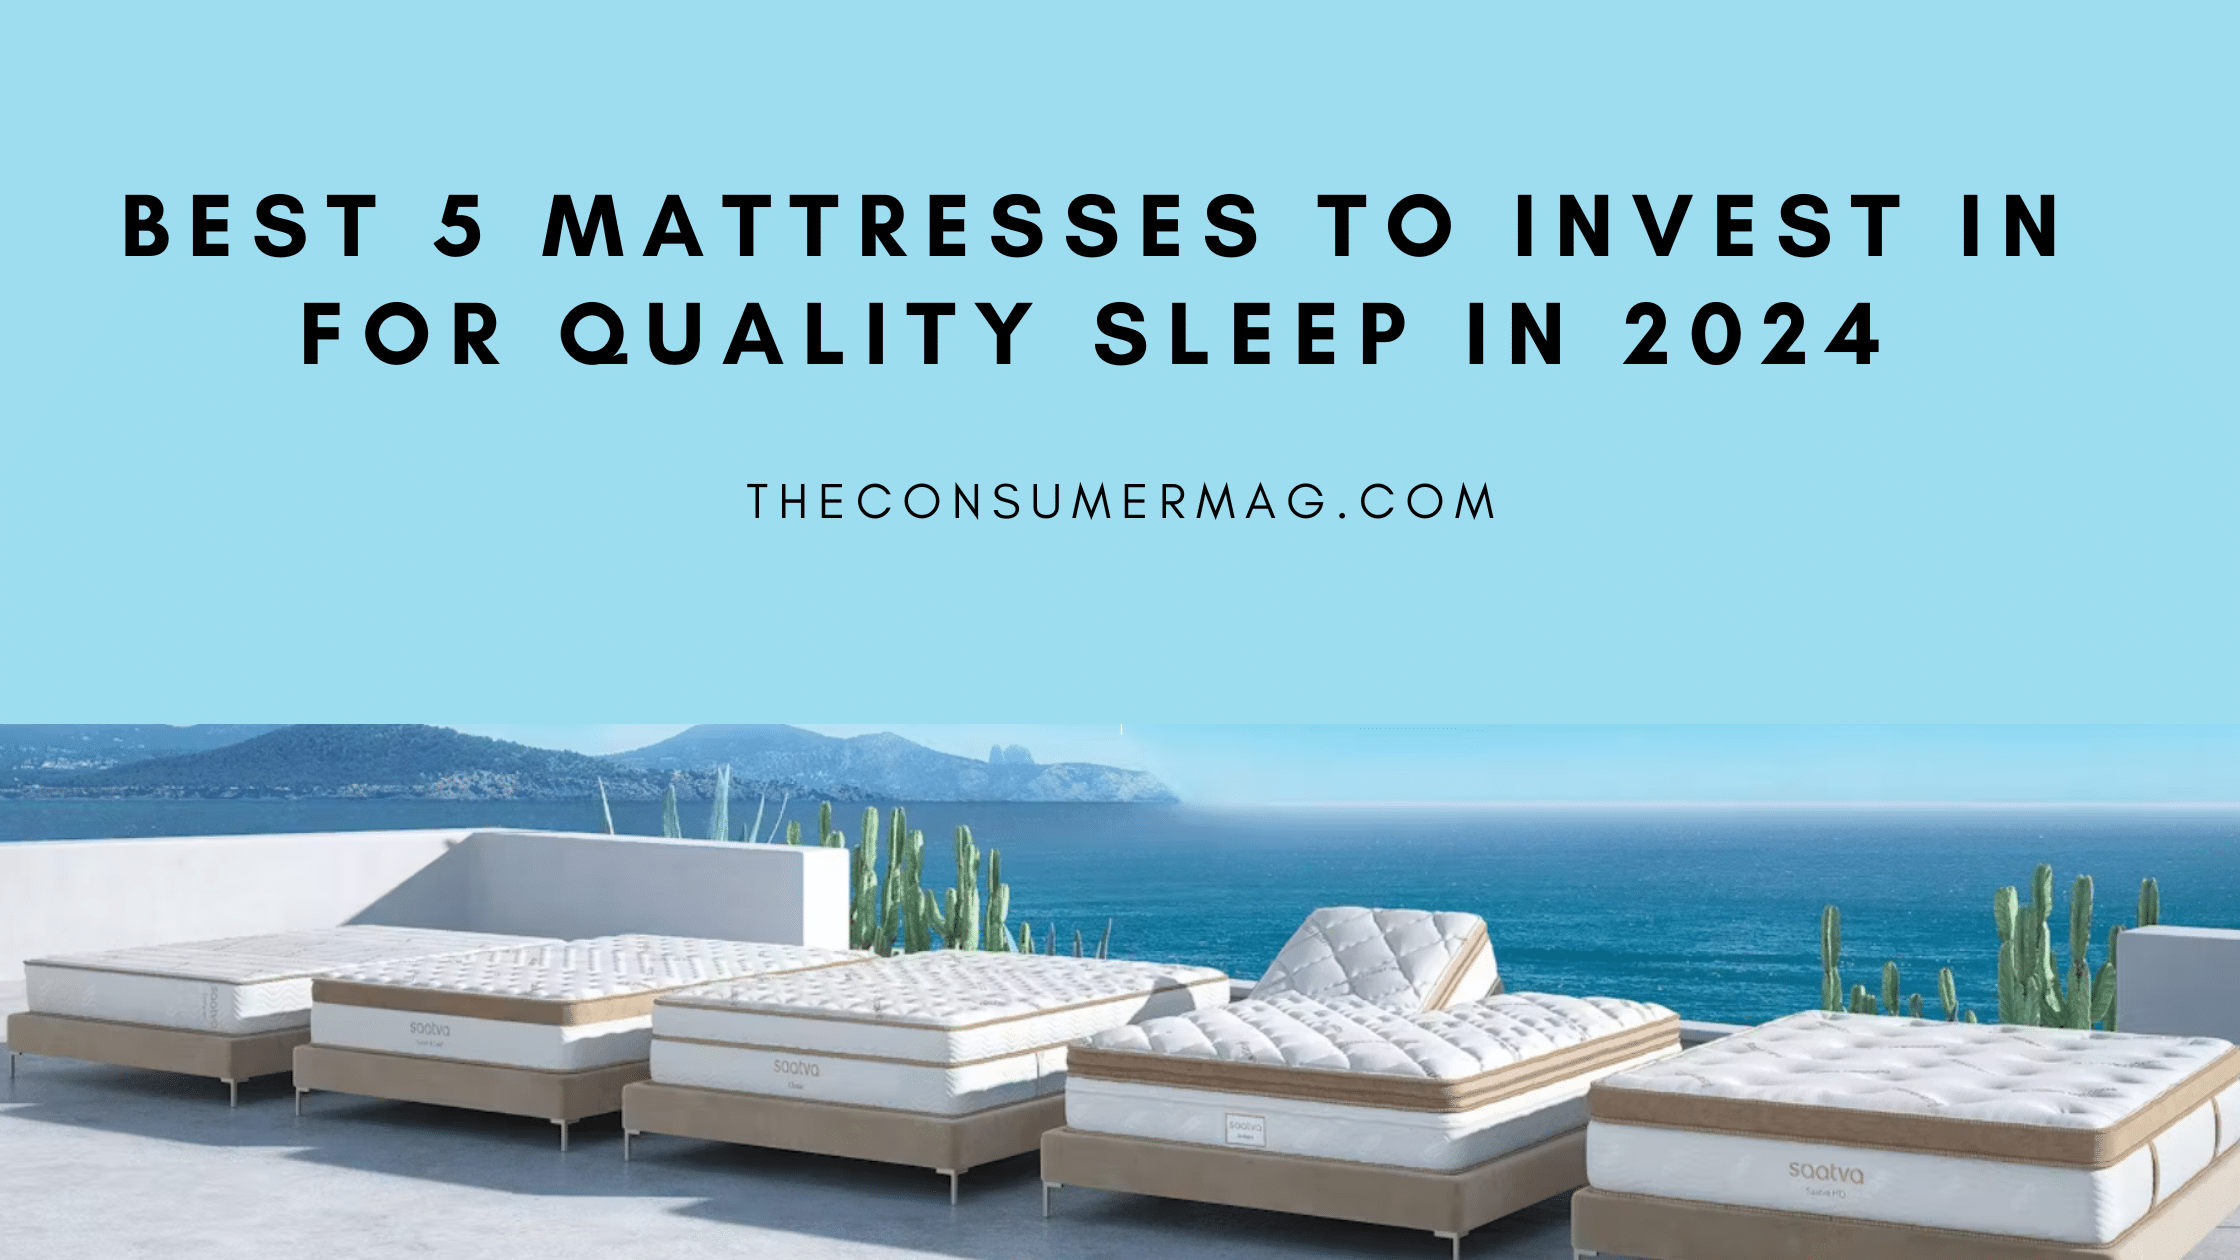 Best 5 Mattresses to Invest in for Quality Sleep in 2024